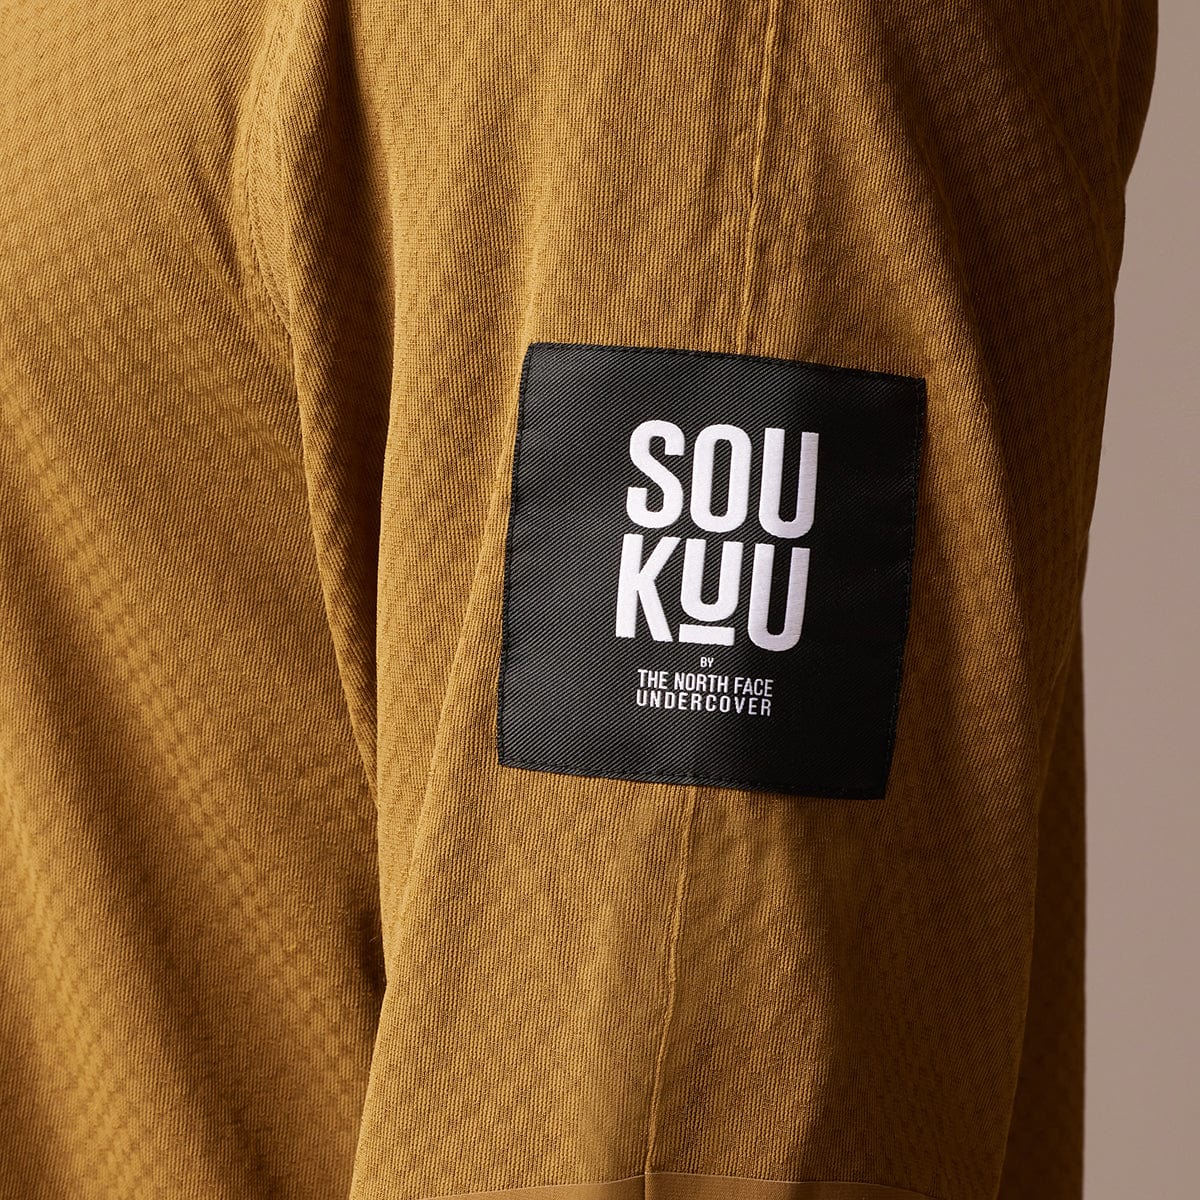 The North Face Shirts SOUKUU BY THE NORTH FACE X UNDERCOVER PROJECT U FUTUREFLEECE LONGSLEEVE CREW